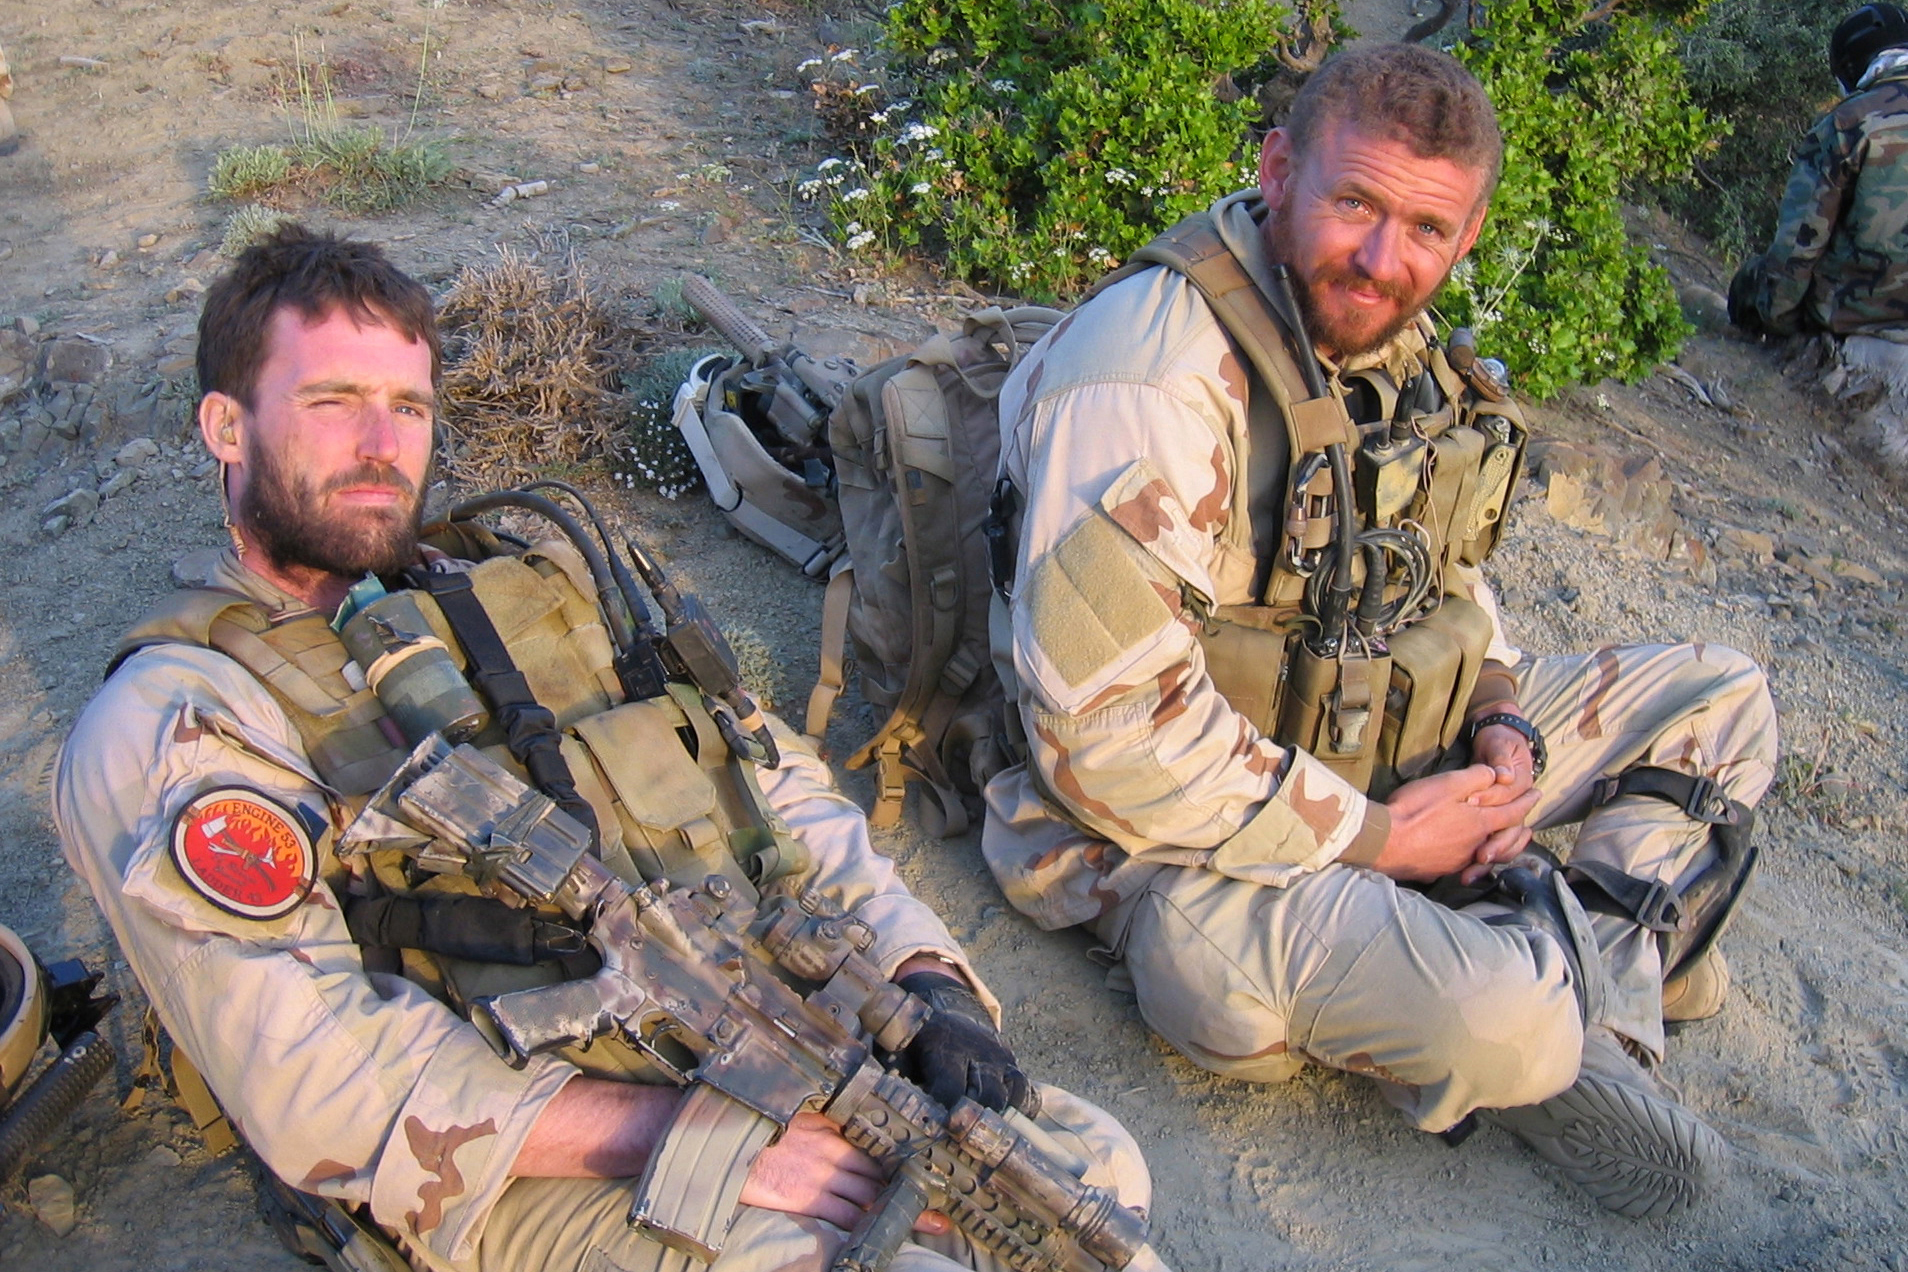 Lt. Michael P. Murphy, the Medal of Honor Awardee Behind 'Lone Survivor' –  The Wild Geese